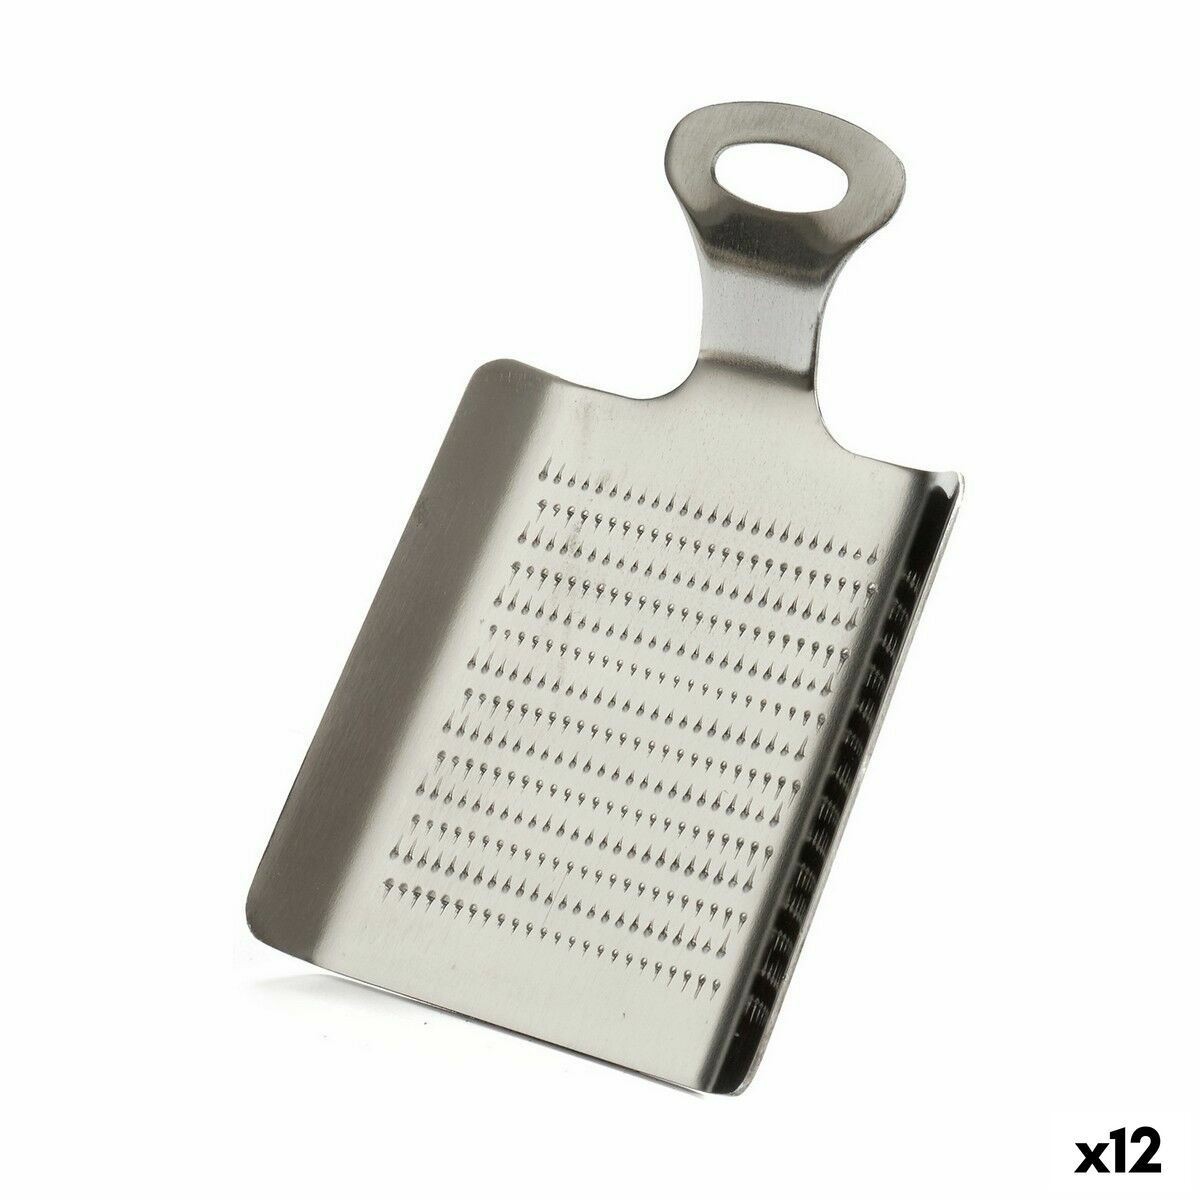 Grater Silver Stainless steel Truffles 2 x 19 x 11 cm (12 Units)